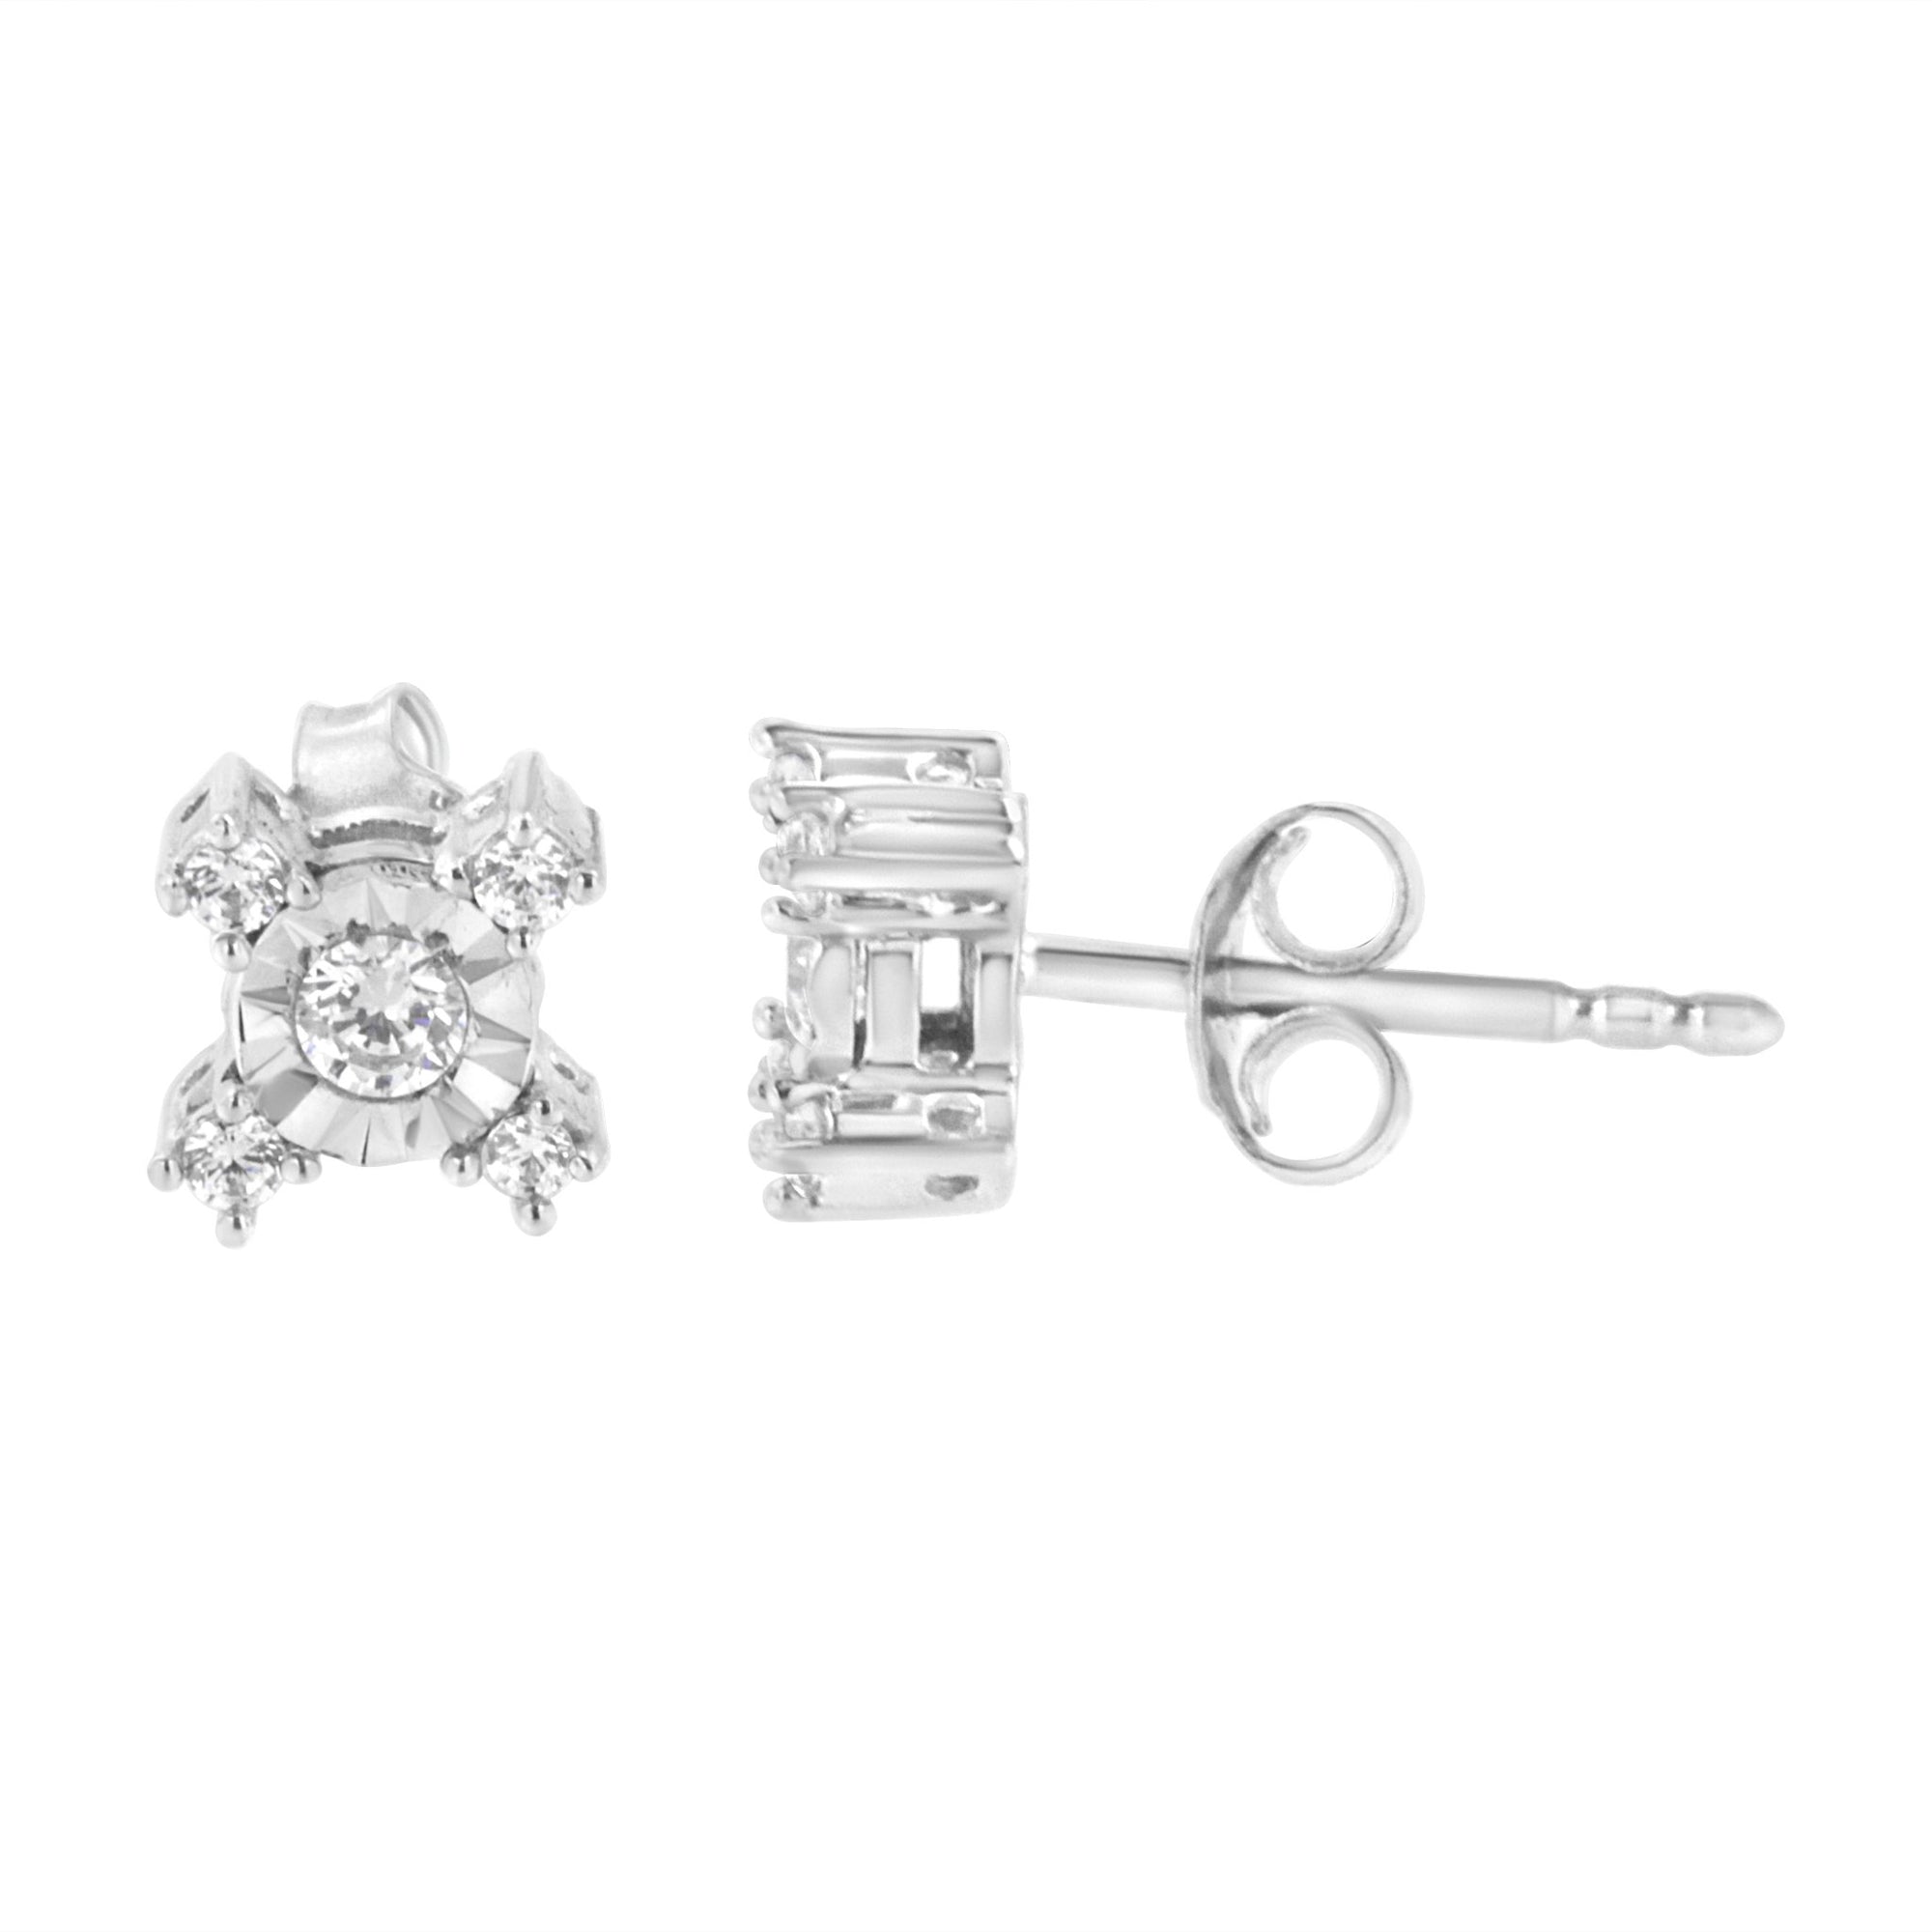 .925 Sterling Silver 1/4 Cttw Miracle Plate Set Round and Princess-Cut Diamond "X" Shaped Stud Earrings (I-J Color, I2-I3 Clarity) - LinkagejewelrydesignLinkagejewelrydesign